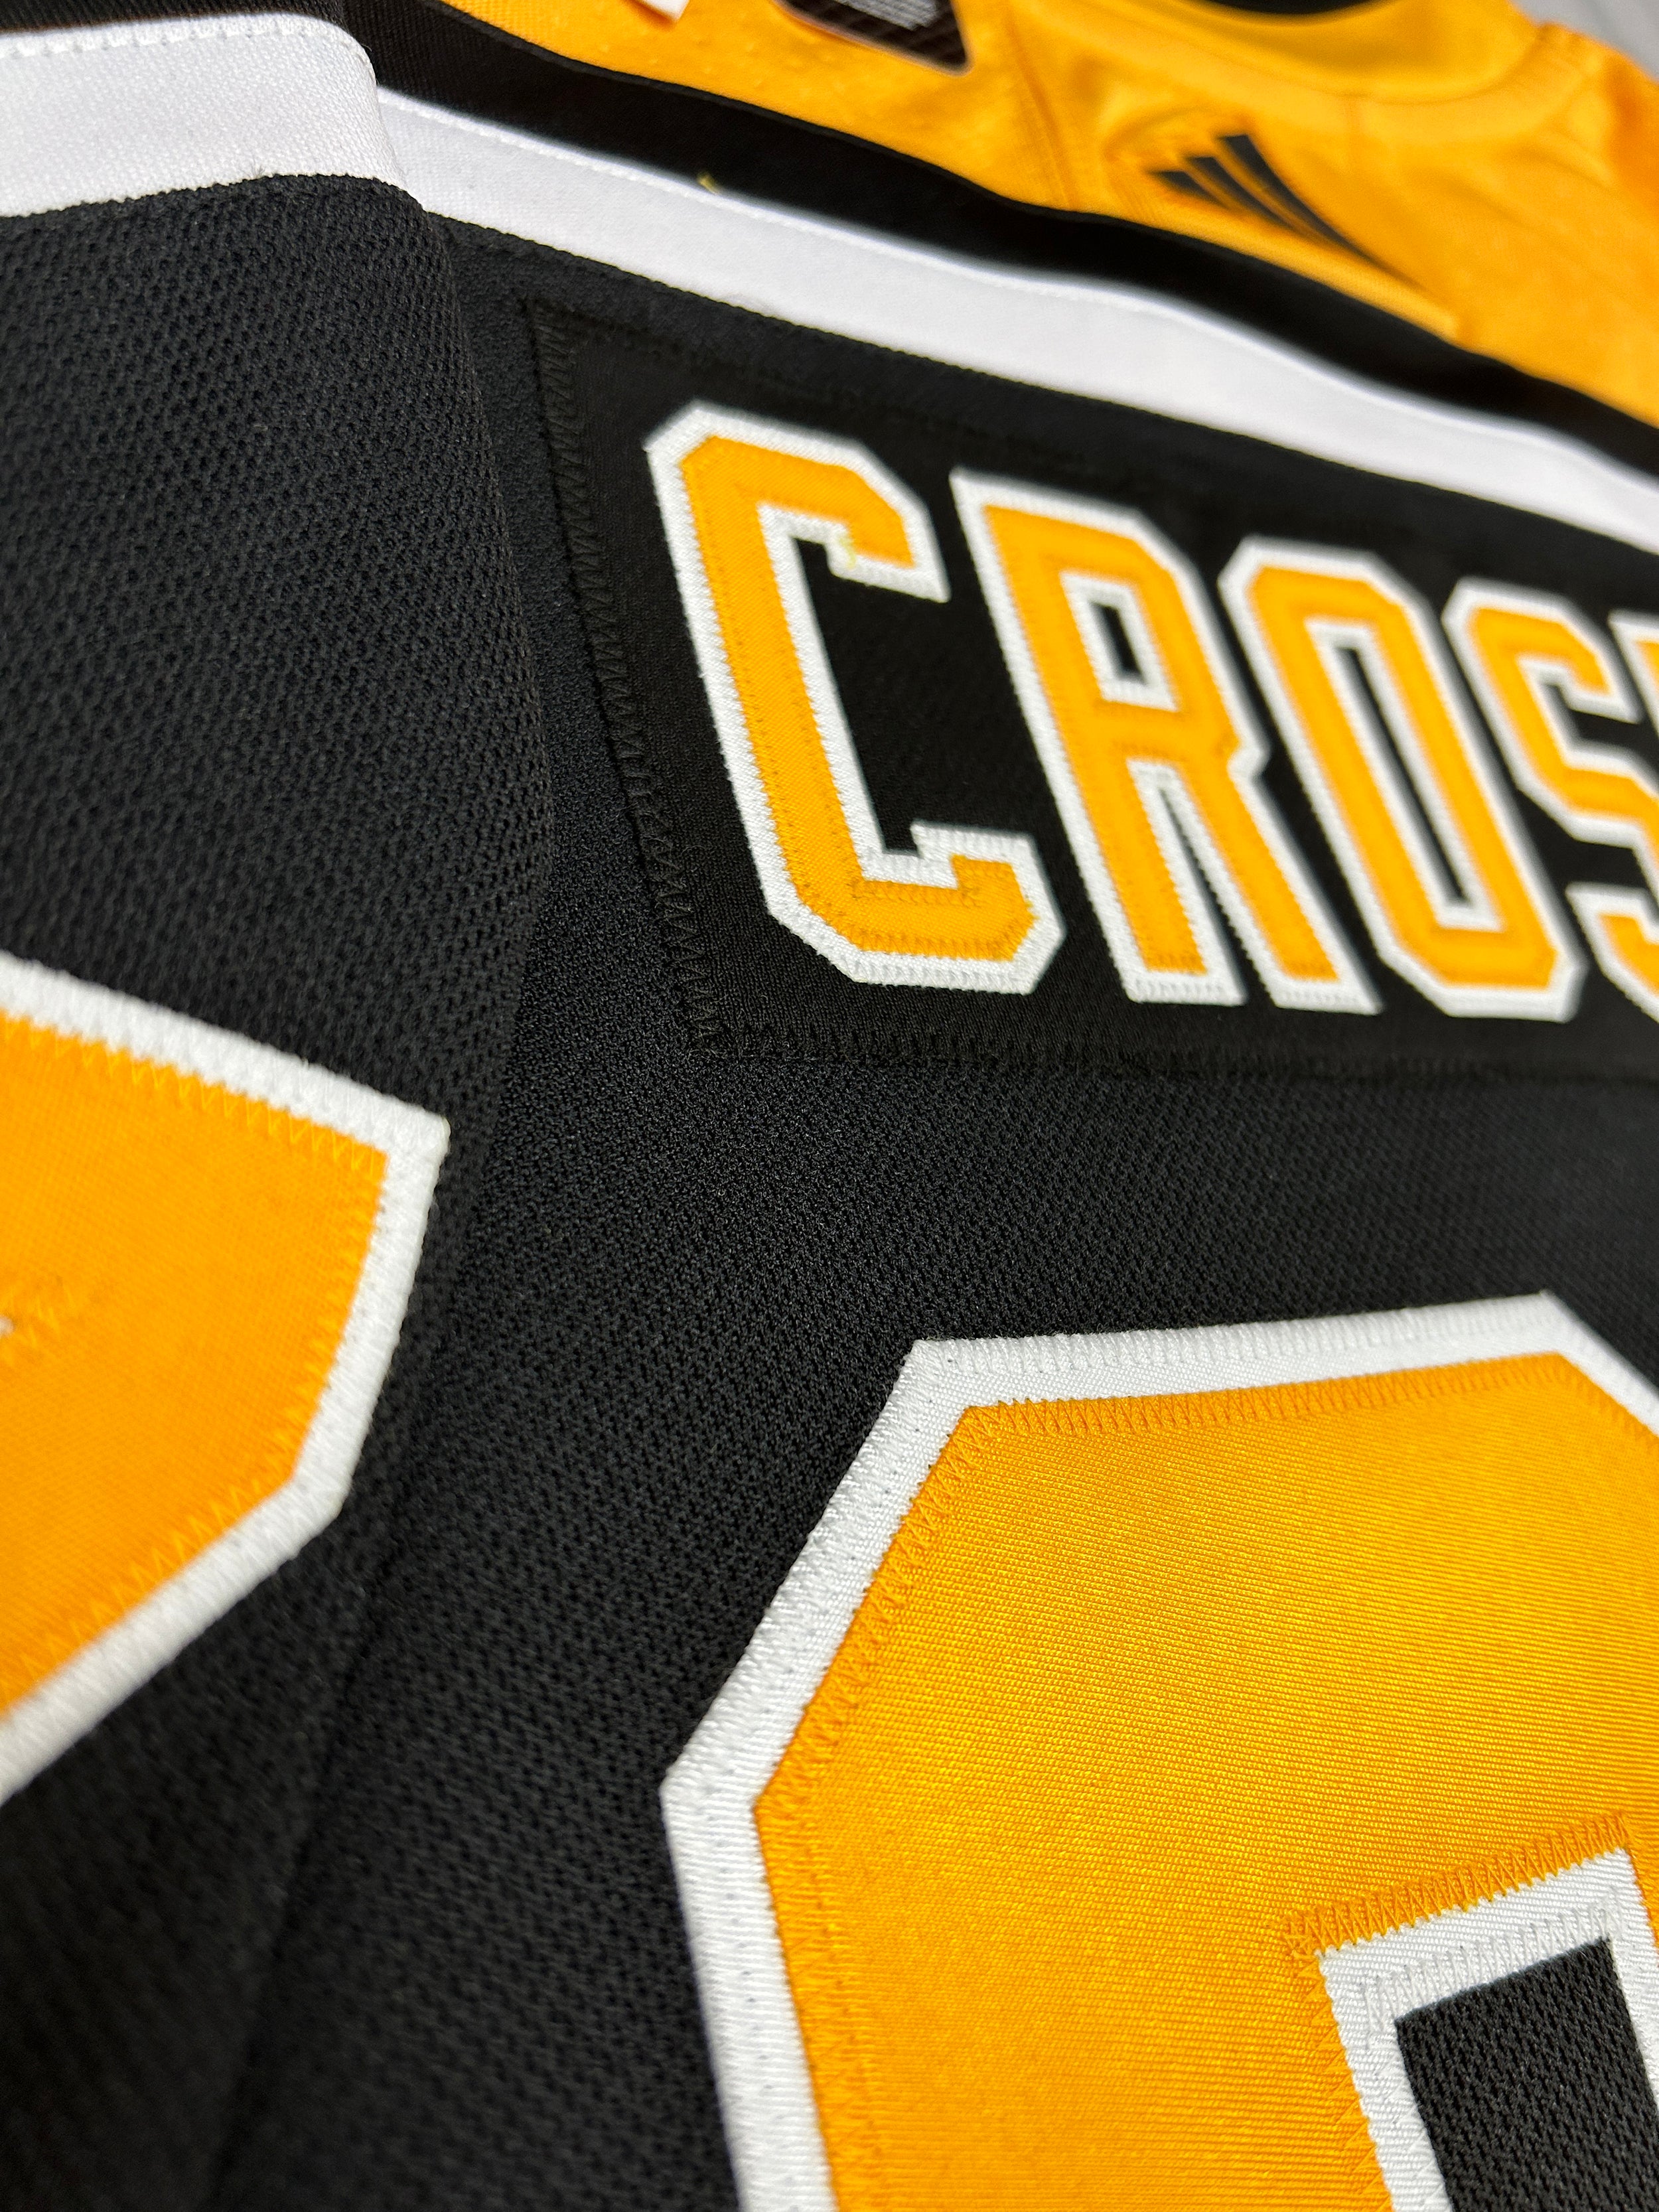 Where does the 'Reverse Retro' jersey rank among the Penguins' all